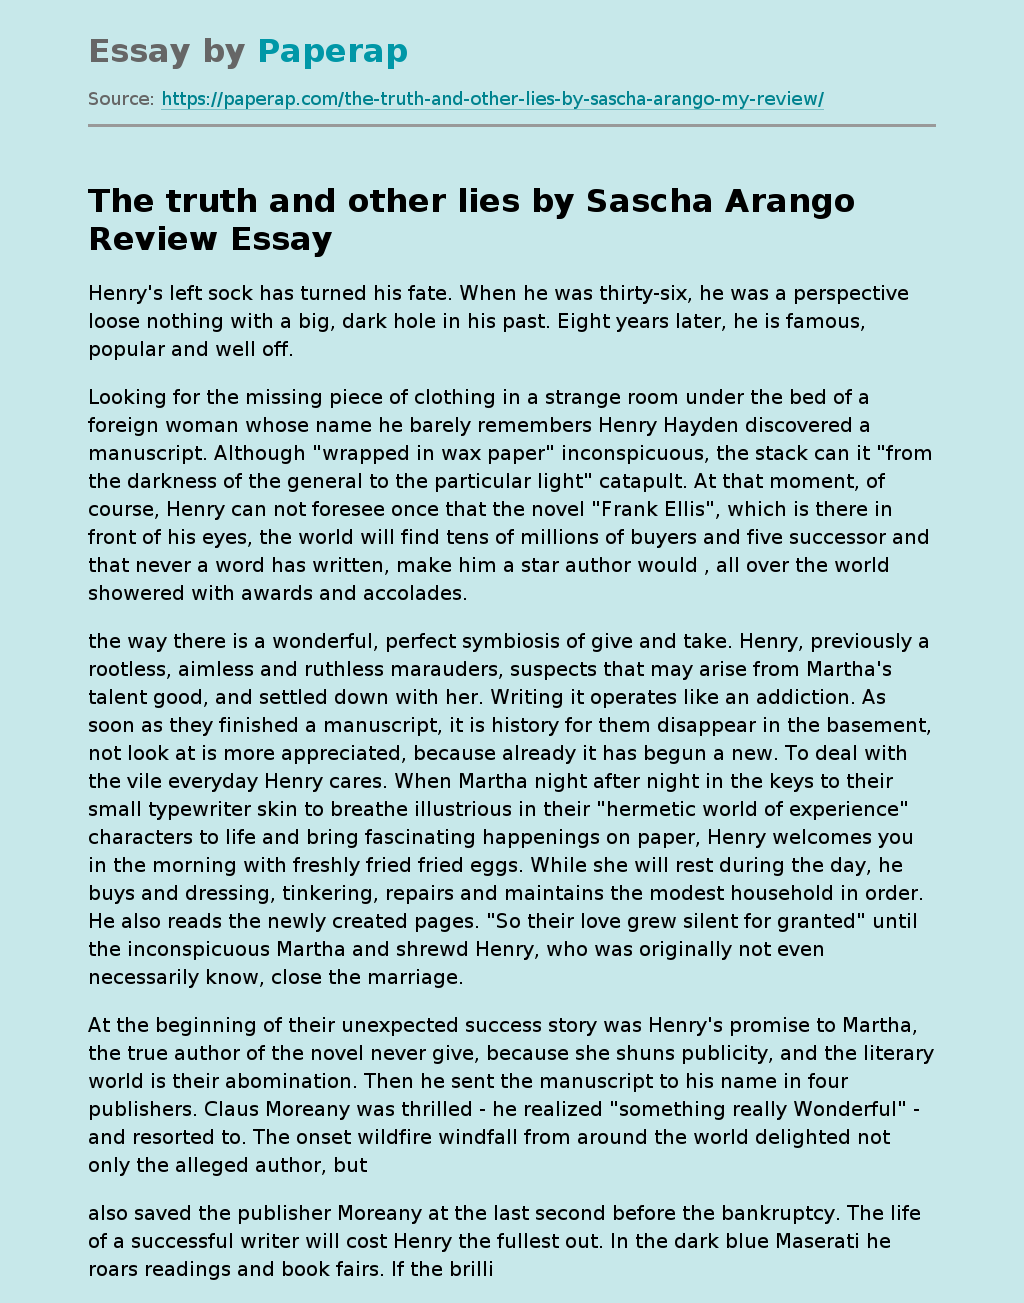 The truth and other lies by Sascha Arango Review